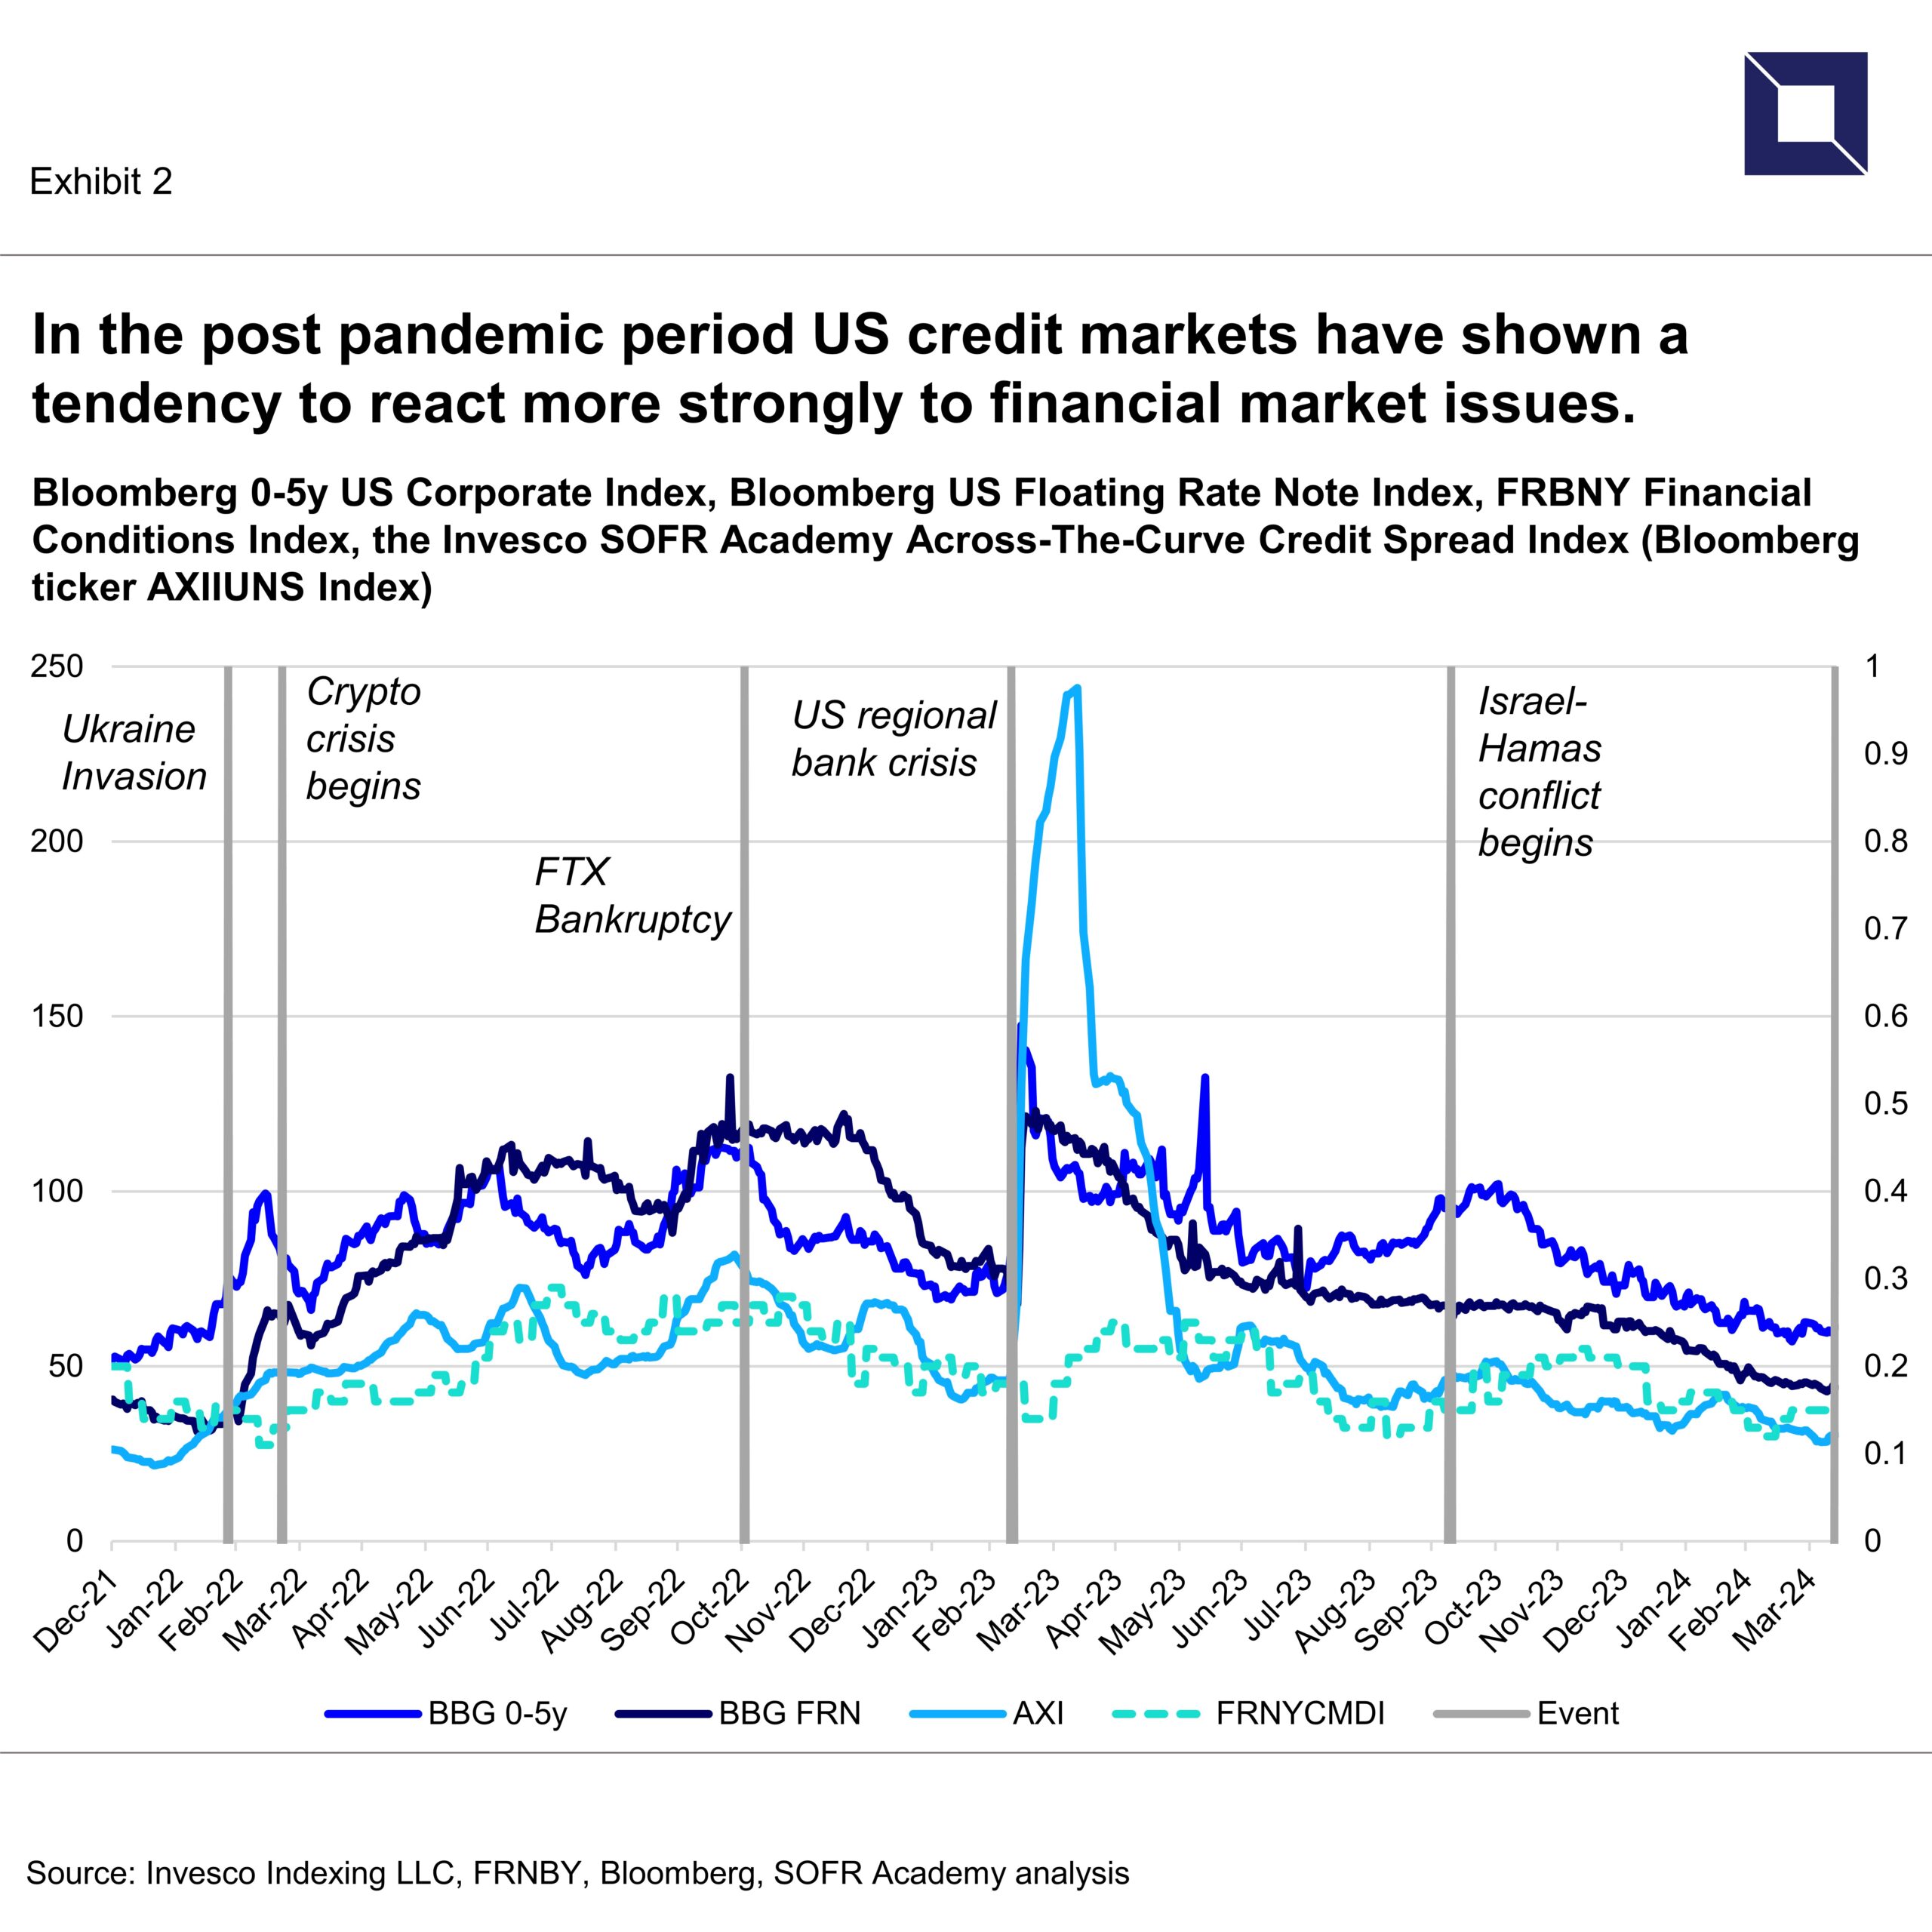 In the post pandemic period US credit markets have shown a tendency to react more strongly to financial market issues | SOFR Academy 